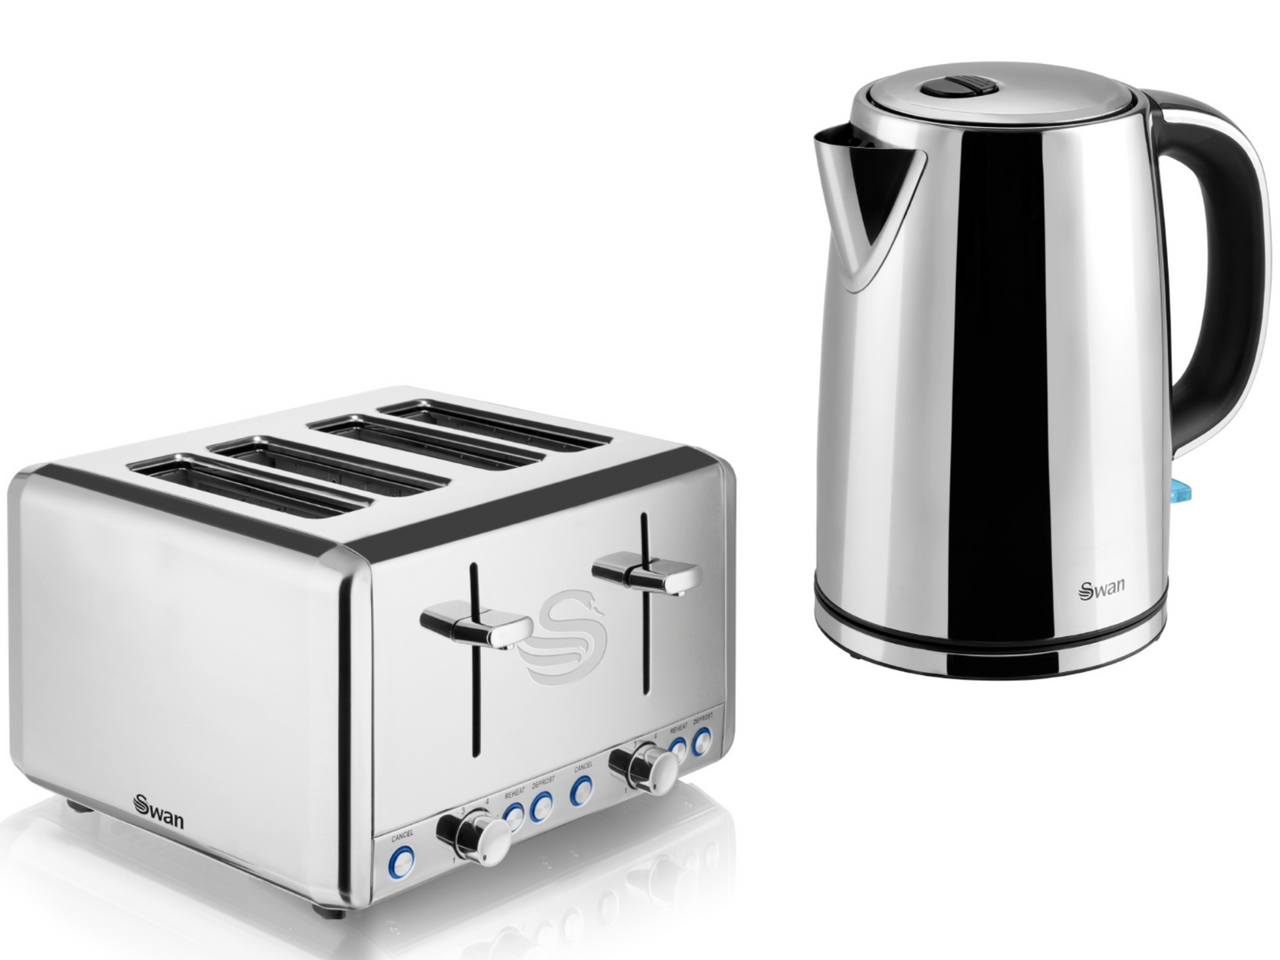 Swan Classics Silver 1.7L Jug Kettle & 4 Slice Toaster Set in Polished Stainless Steel